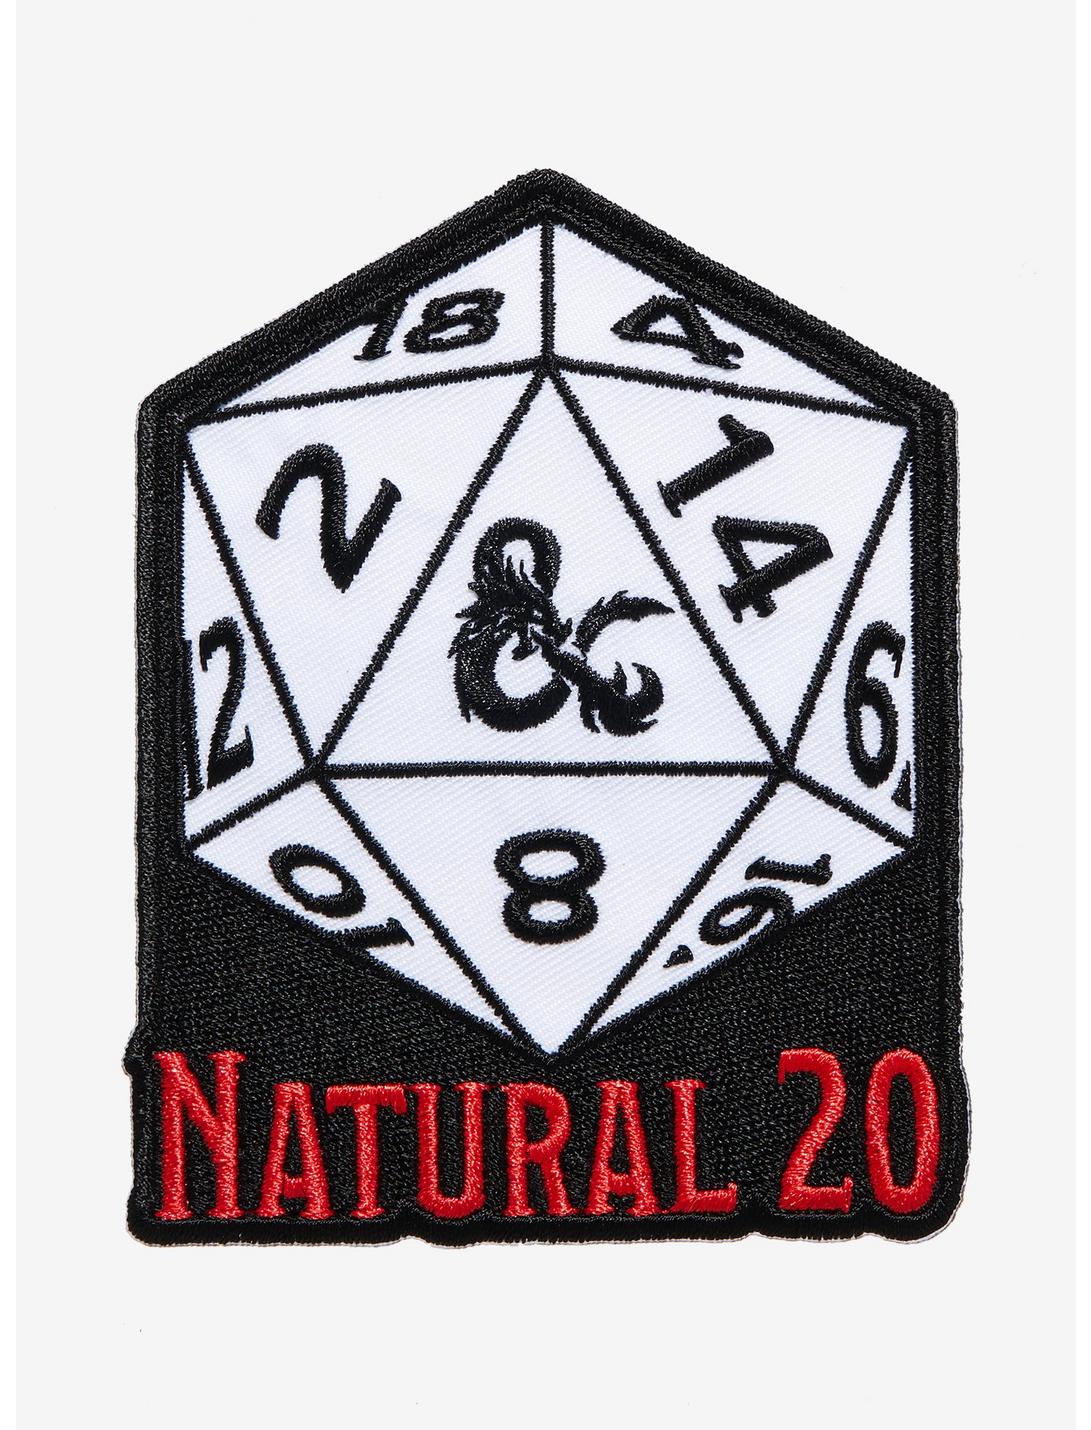 Dungeons & Dragons Natural 20 Dice Patch, , hi-res